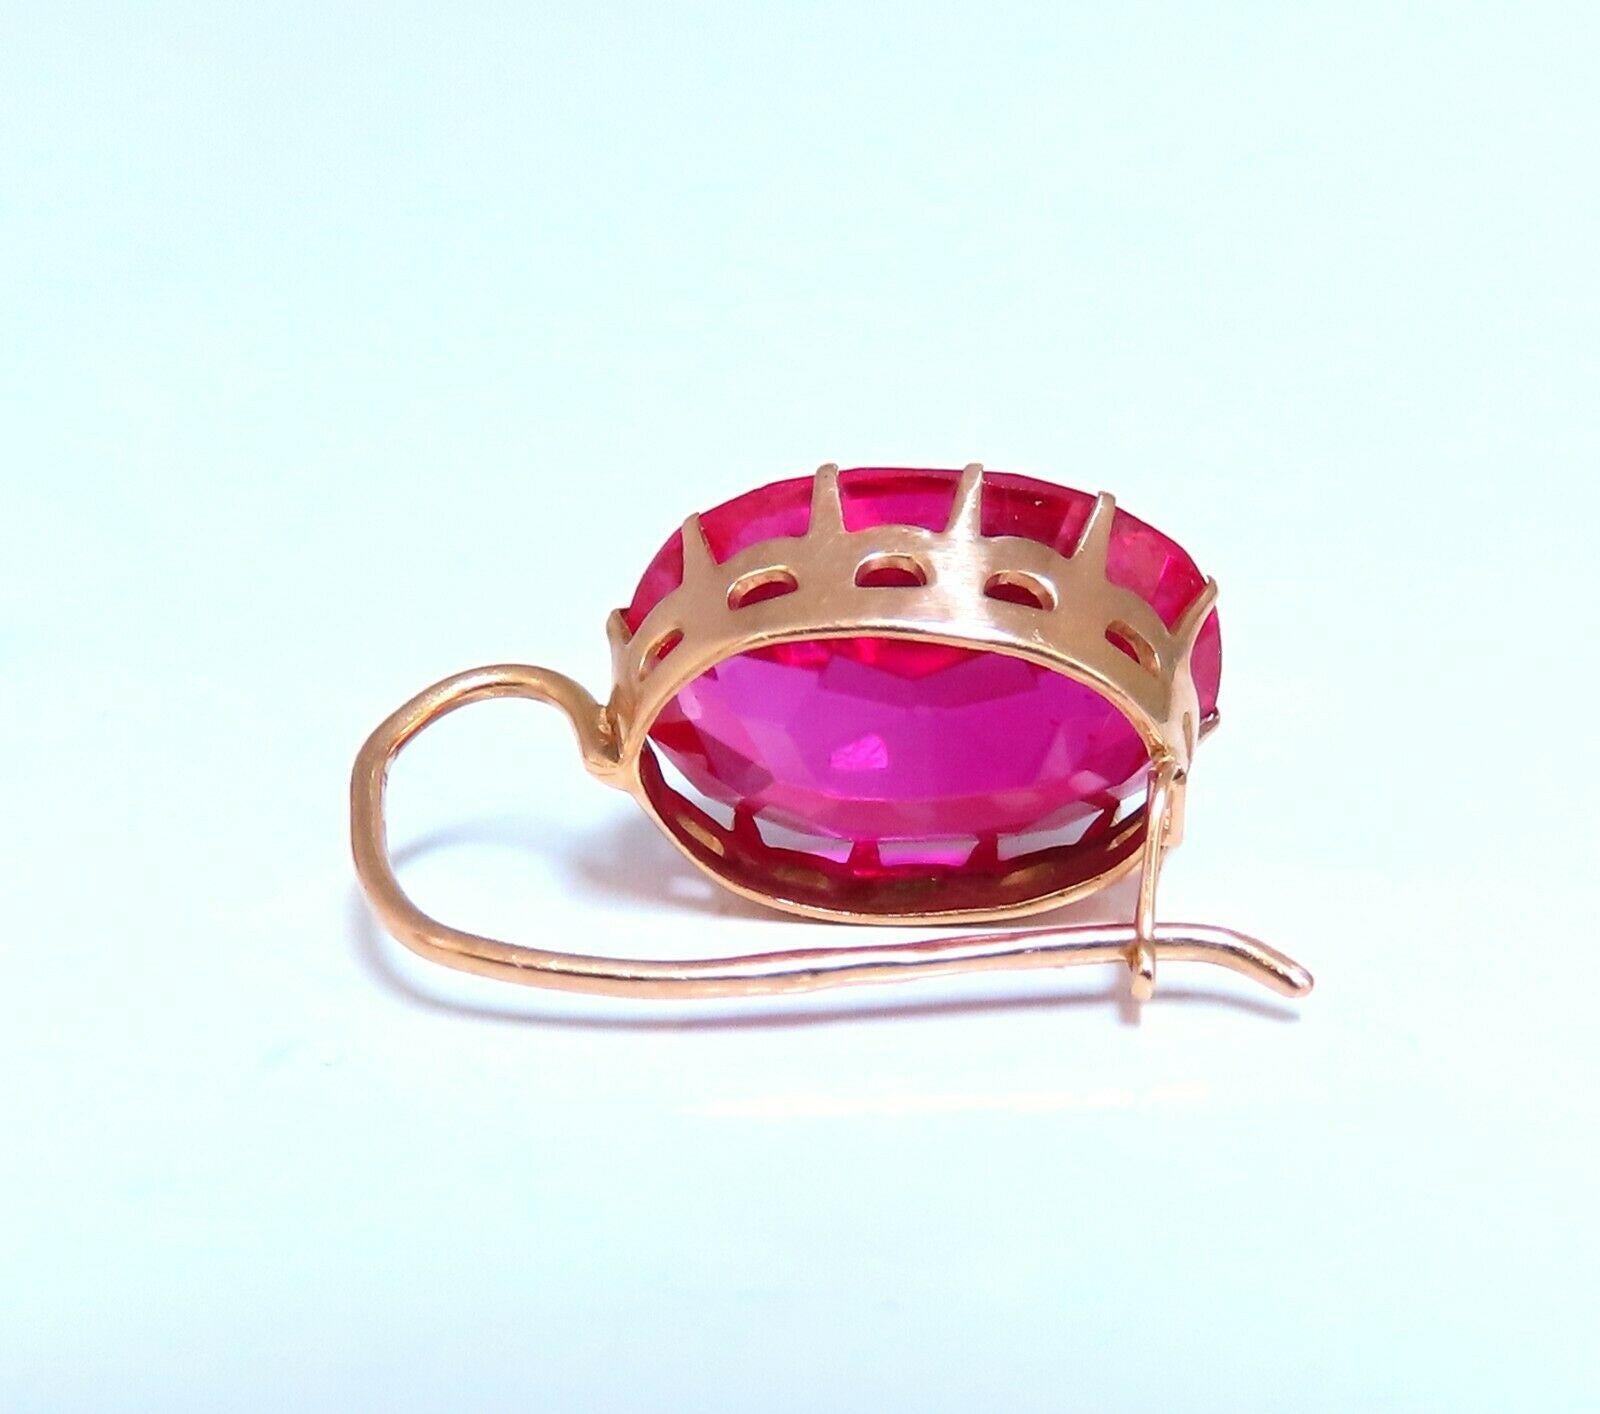 Lab Created Ruby Earrings

Totaling: 32ct.

Oval Cut, Clean clarity and brilliant cut

Excellent transparency

16 x 12mm 

14kt. yellow gold

7.8 grams

Earrings overall: 

23 X 12.5mm

Wire Insert